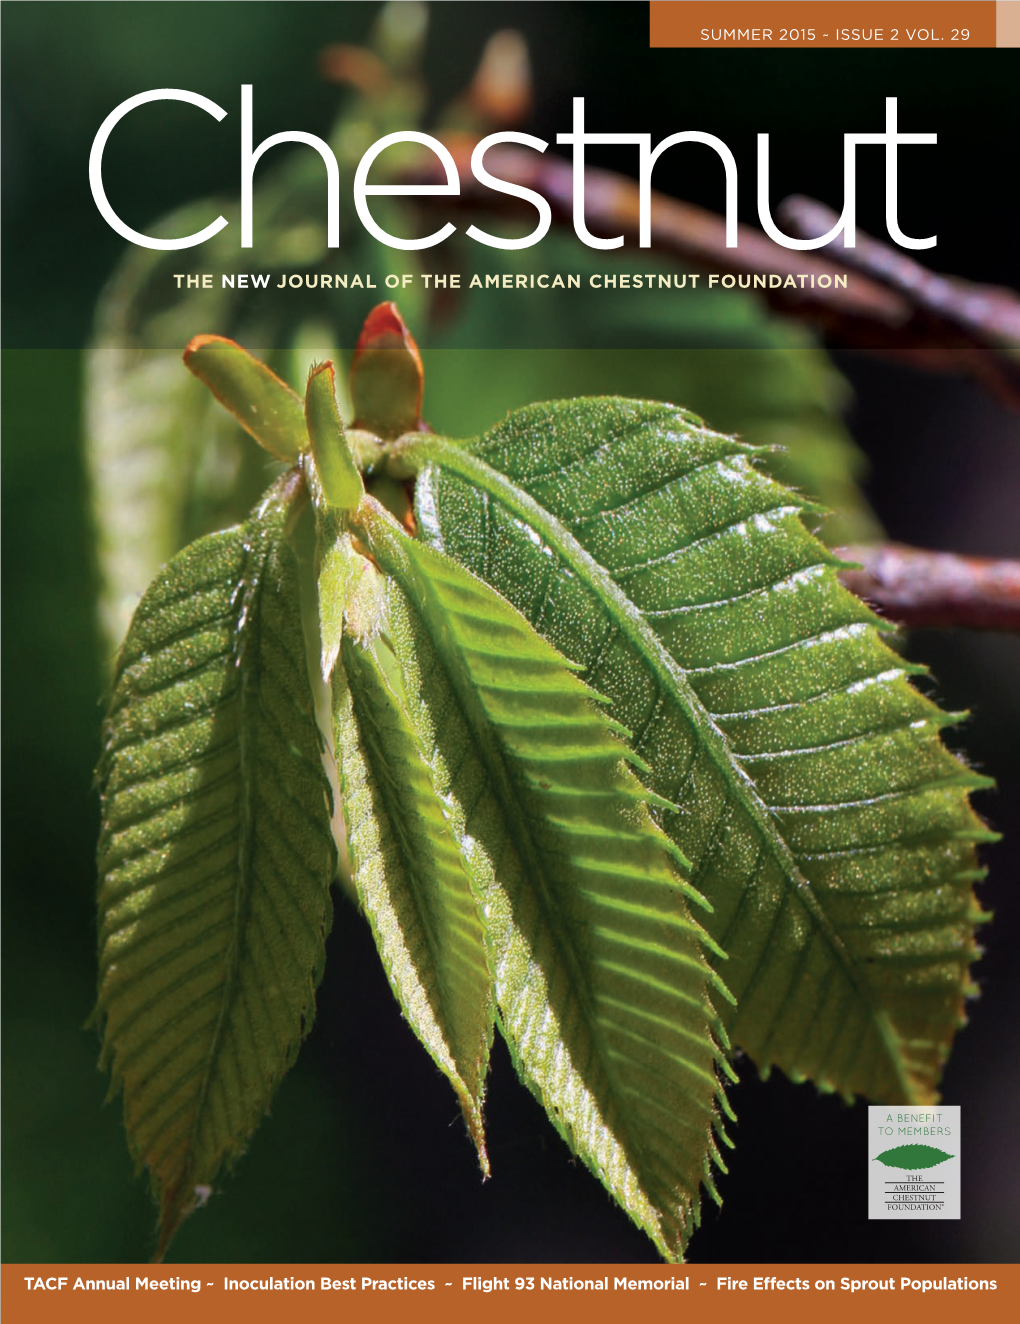 The New Journal of the American Chestnut Foundation